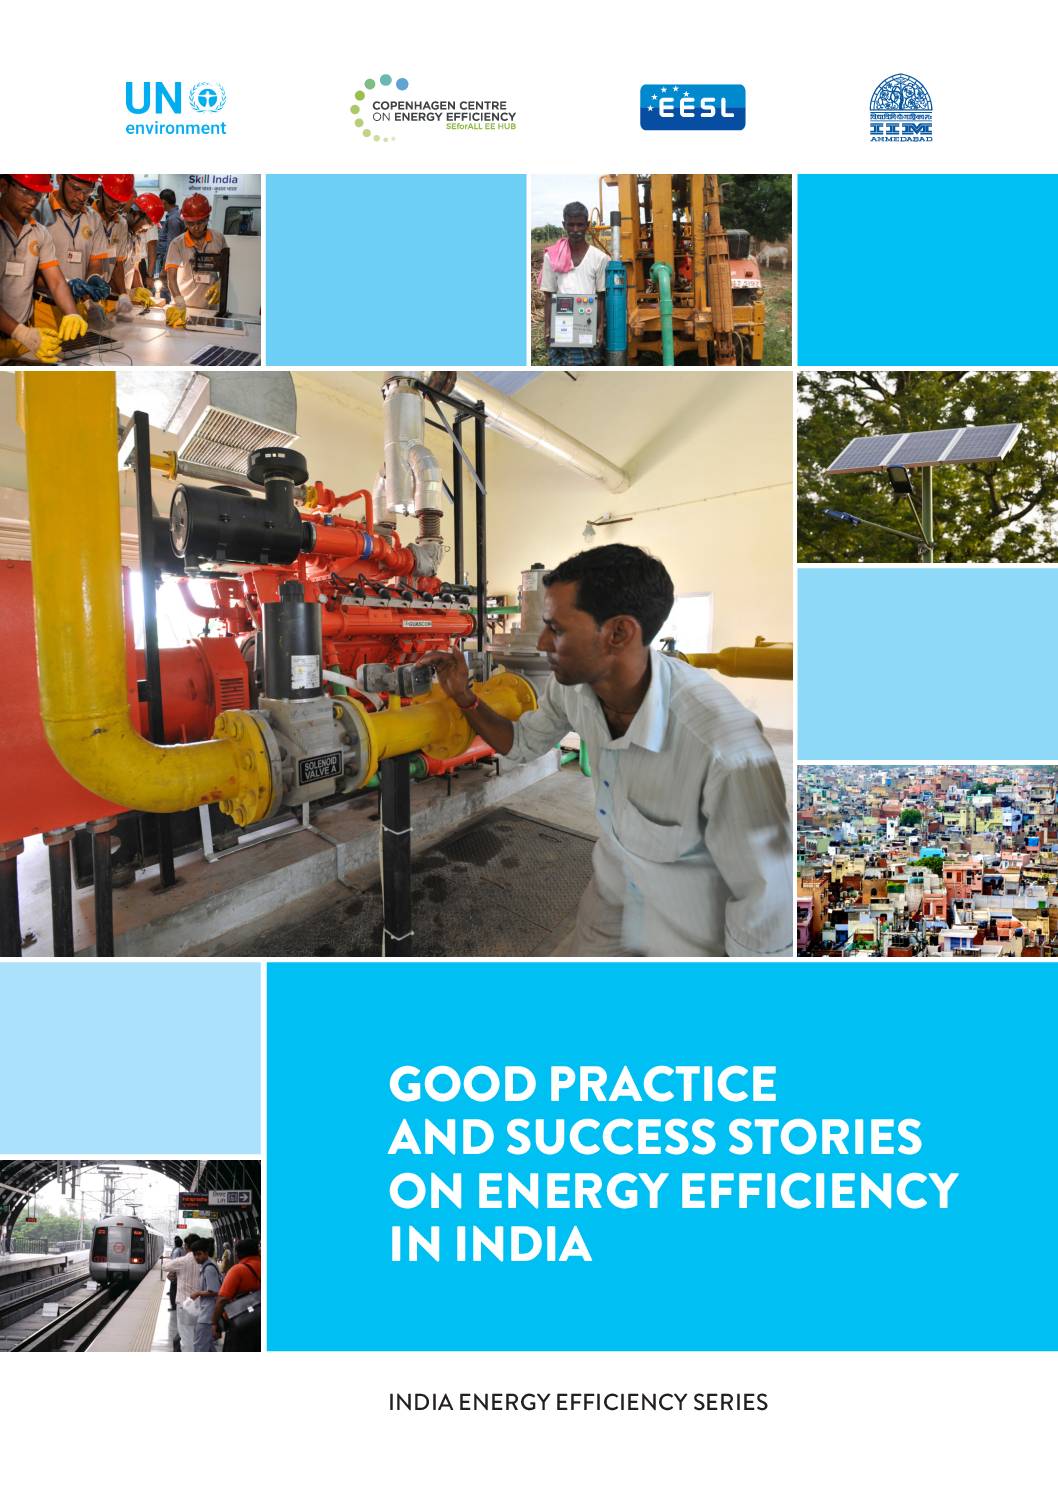 Good Practice and Success Stories on Energy Efficiency in India